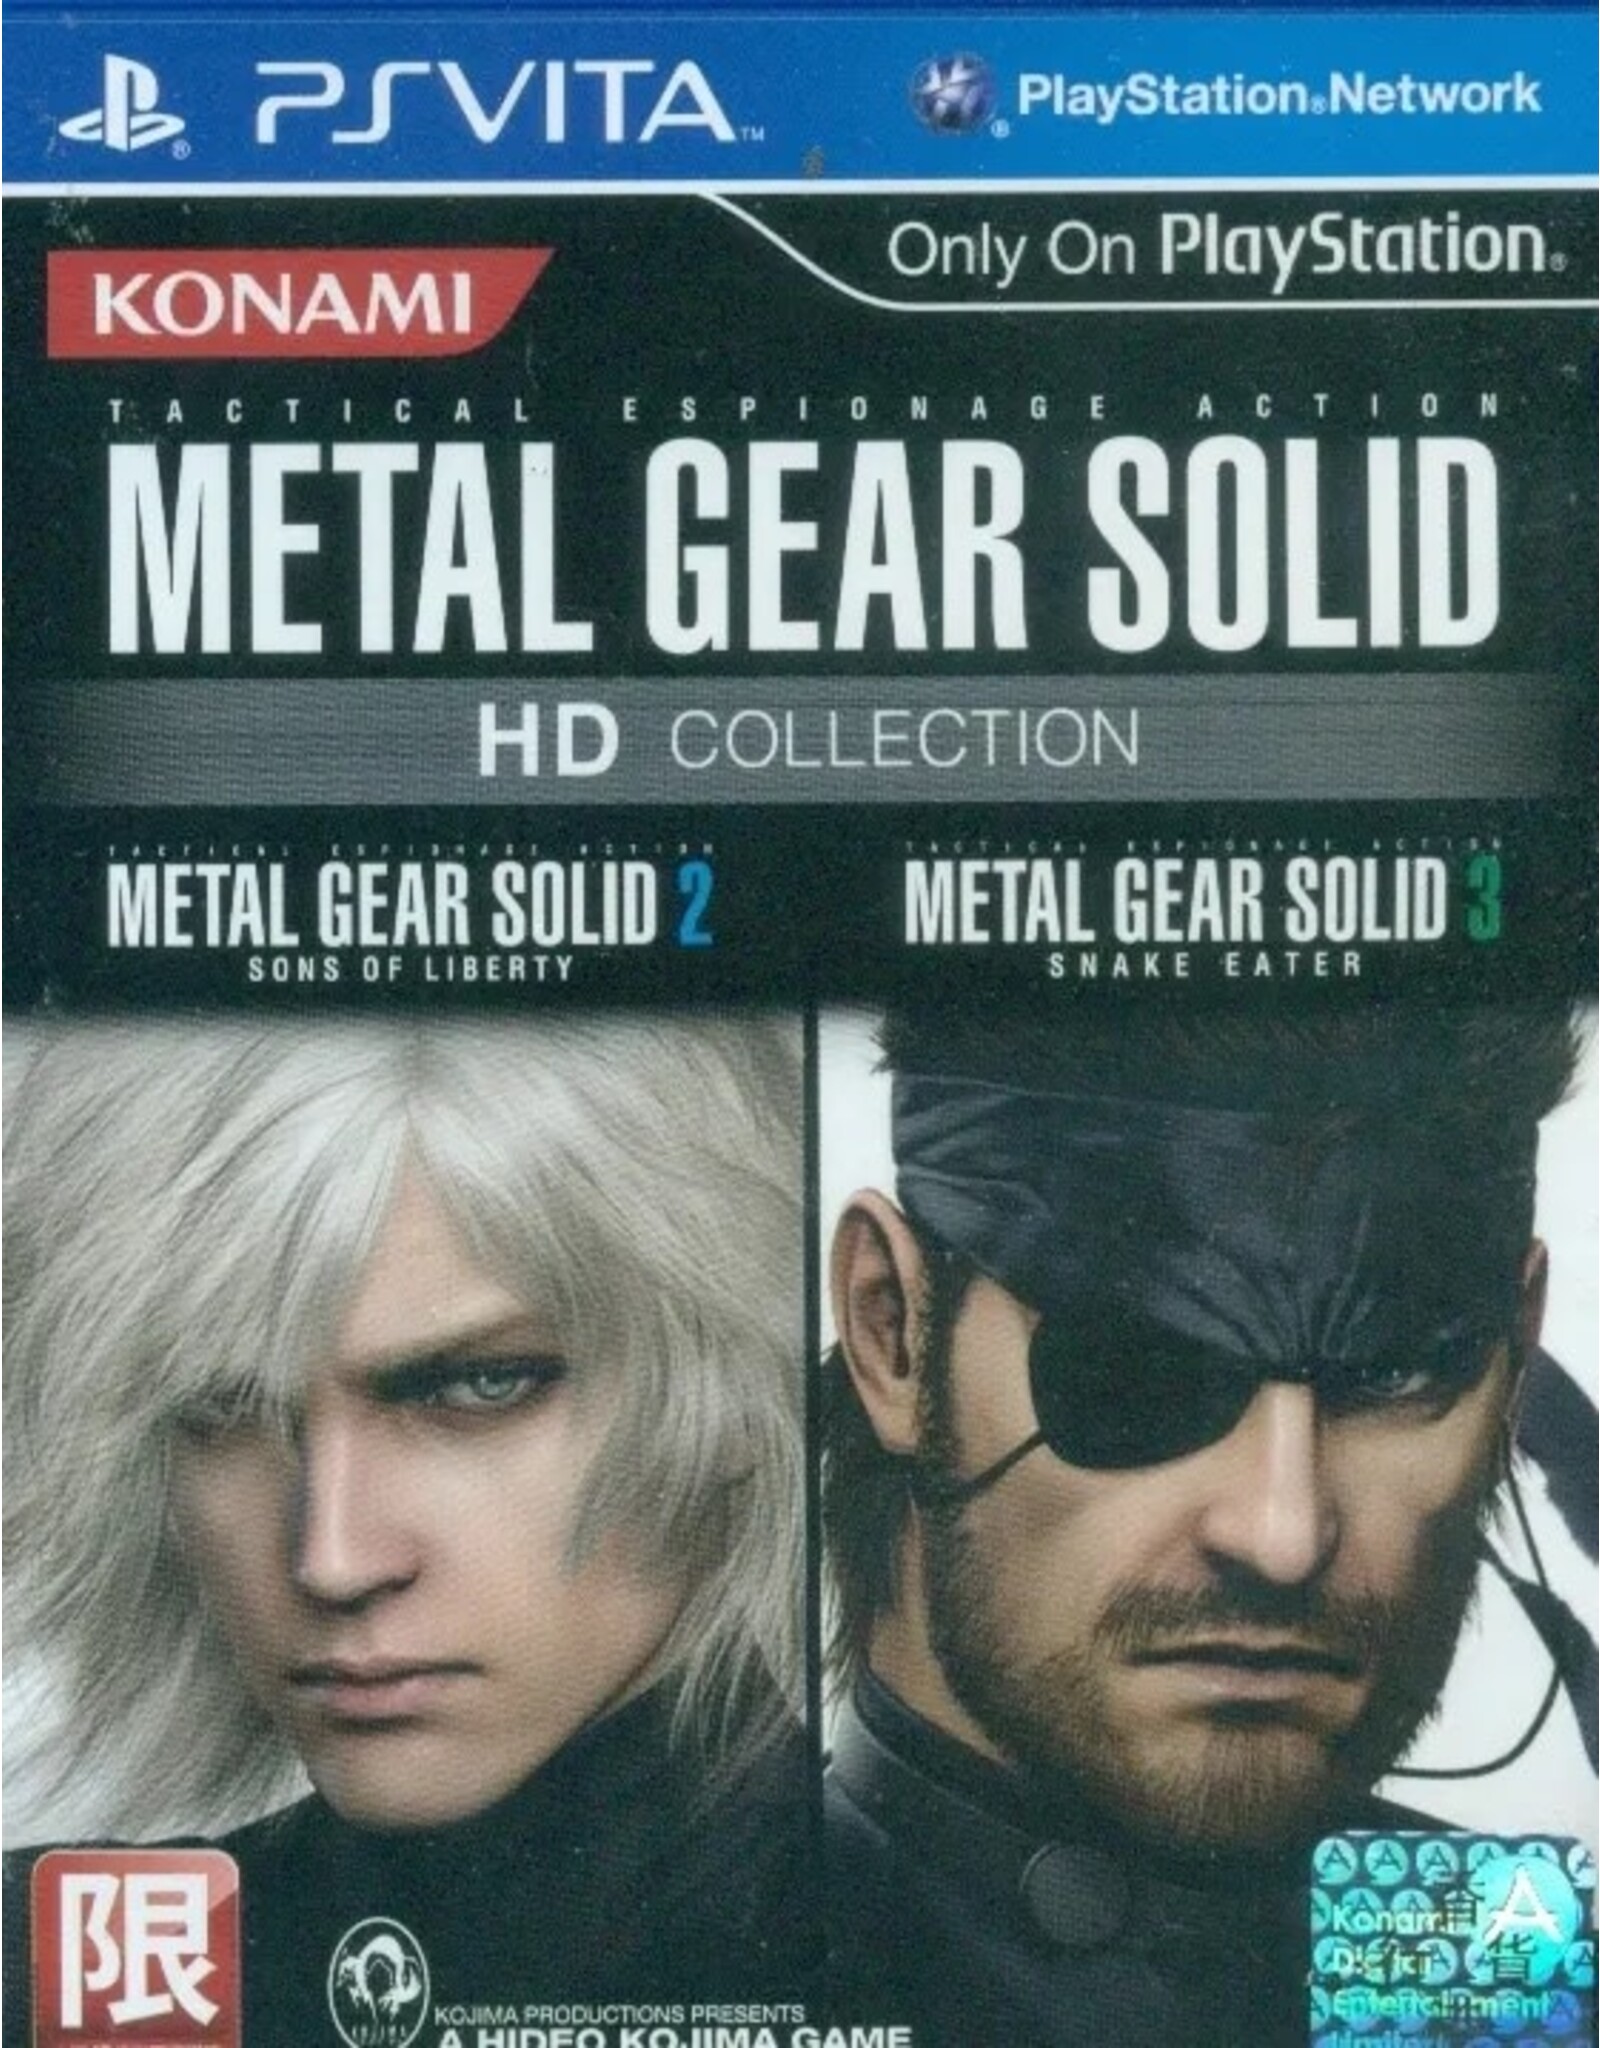 Playstation Vita Metal Gear Solid HD Collection (CiB, Asia Import, Plays in English)